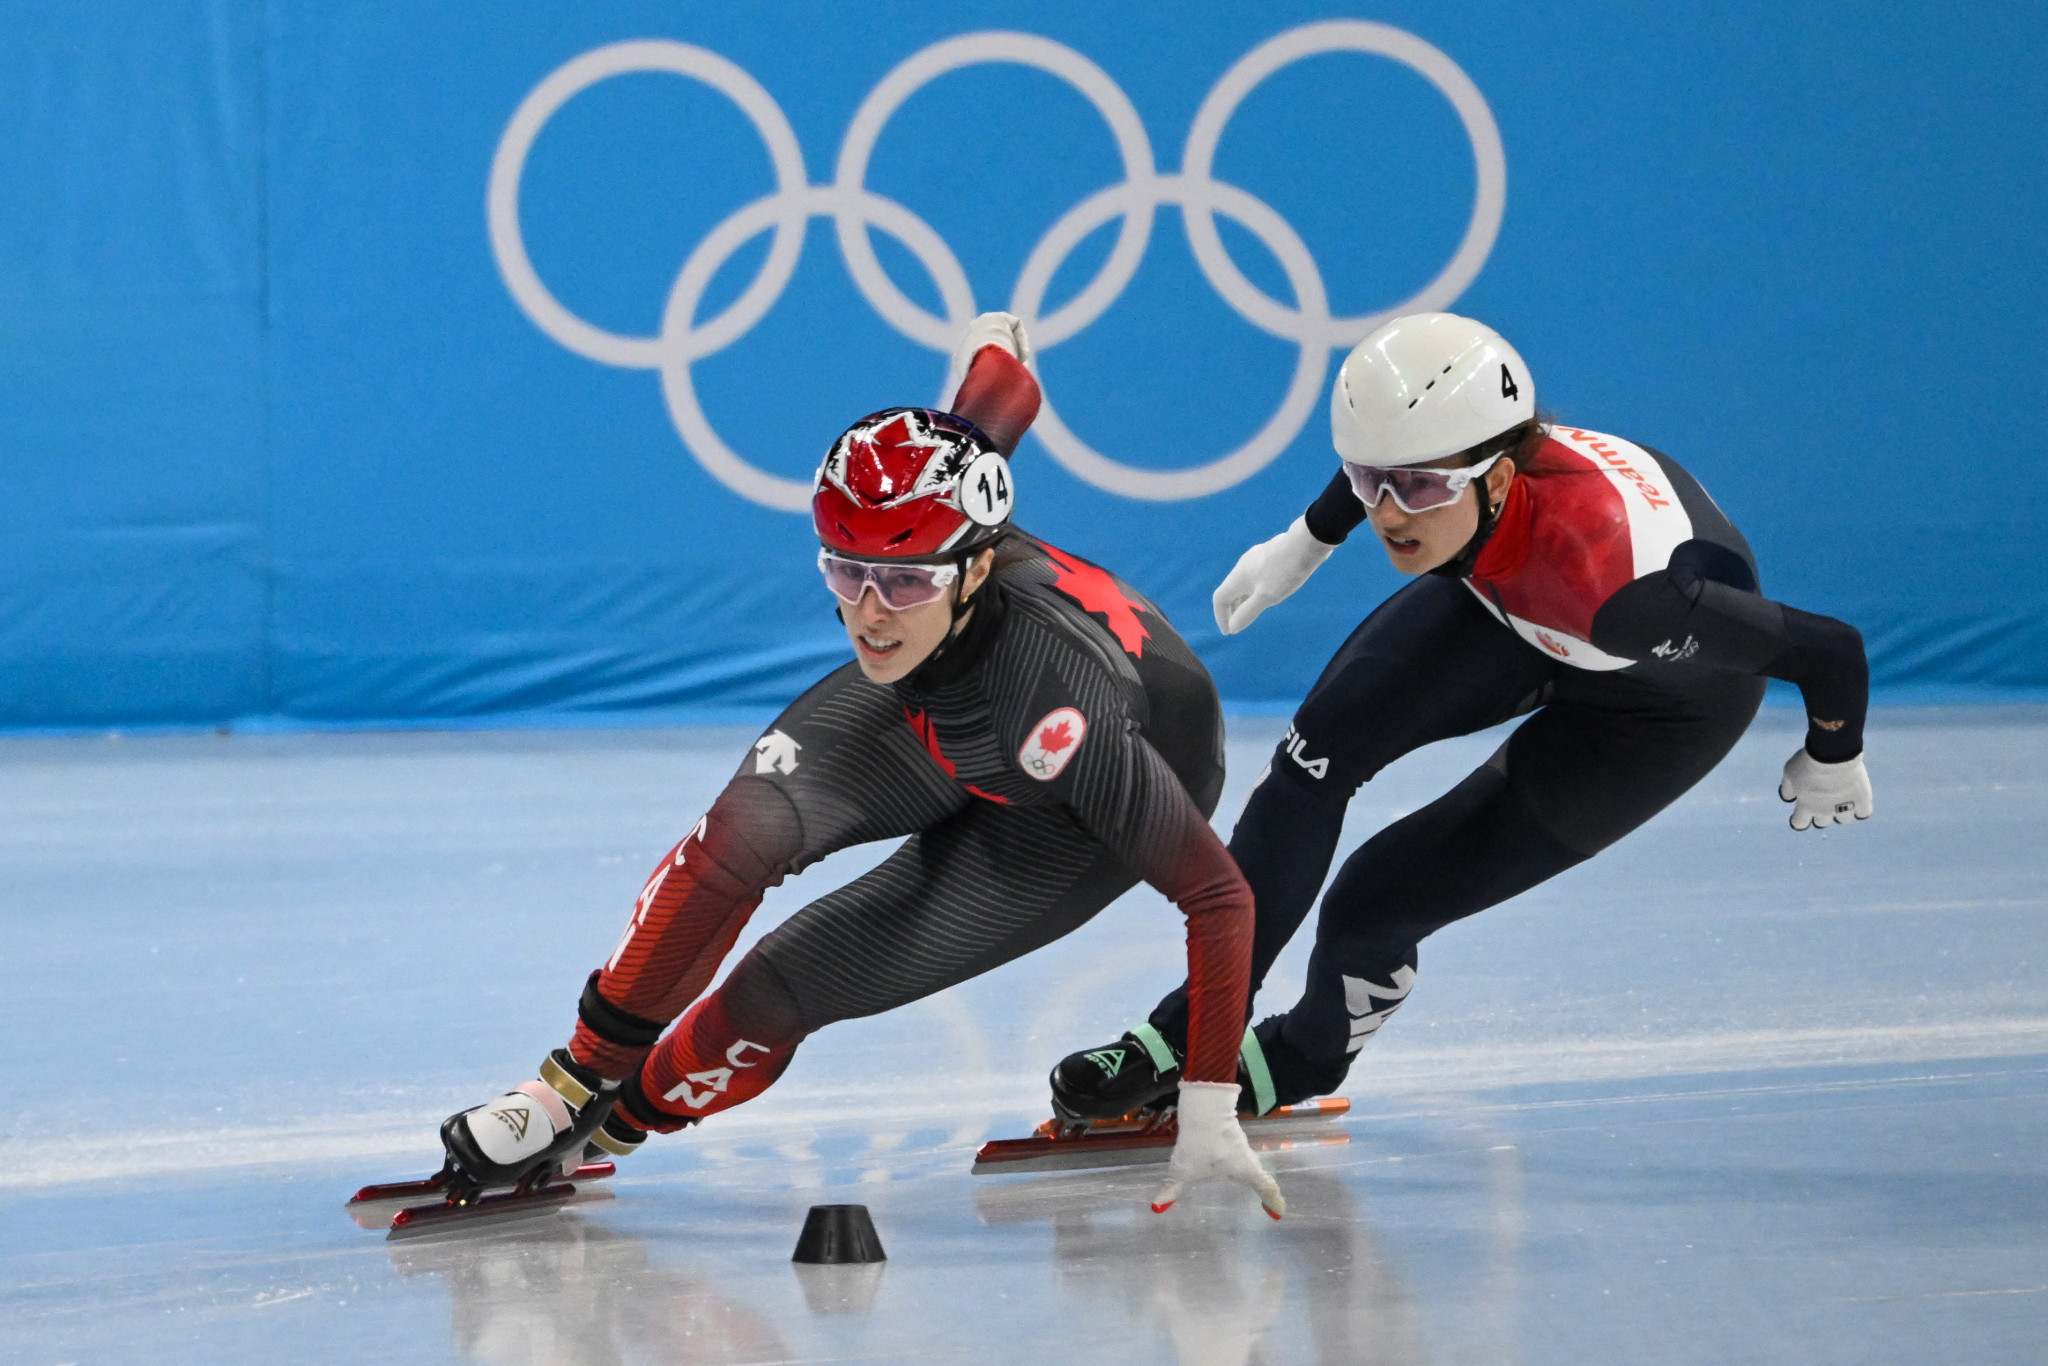 Canada's Florence Brunelle won three gold medals at the World Junior Short Track Speed Skating Championships in in Gdansk just weeks after competing at Beijing 2022 ©Getty Images